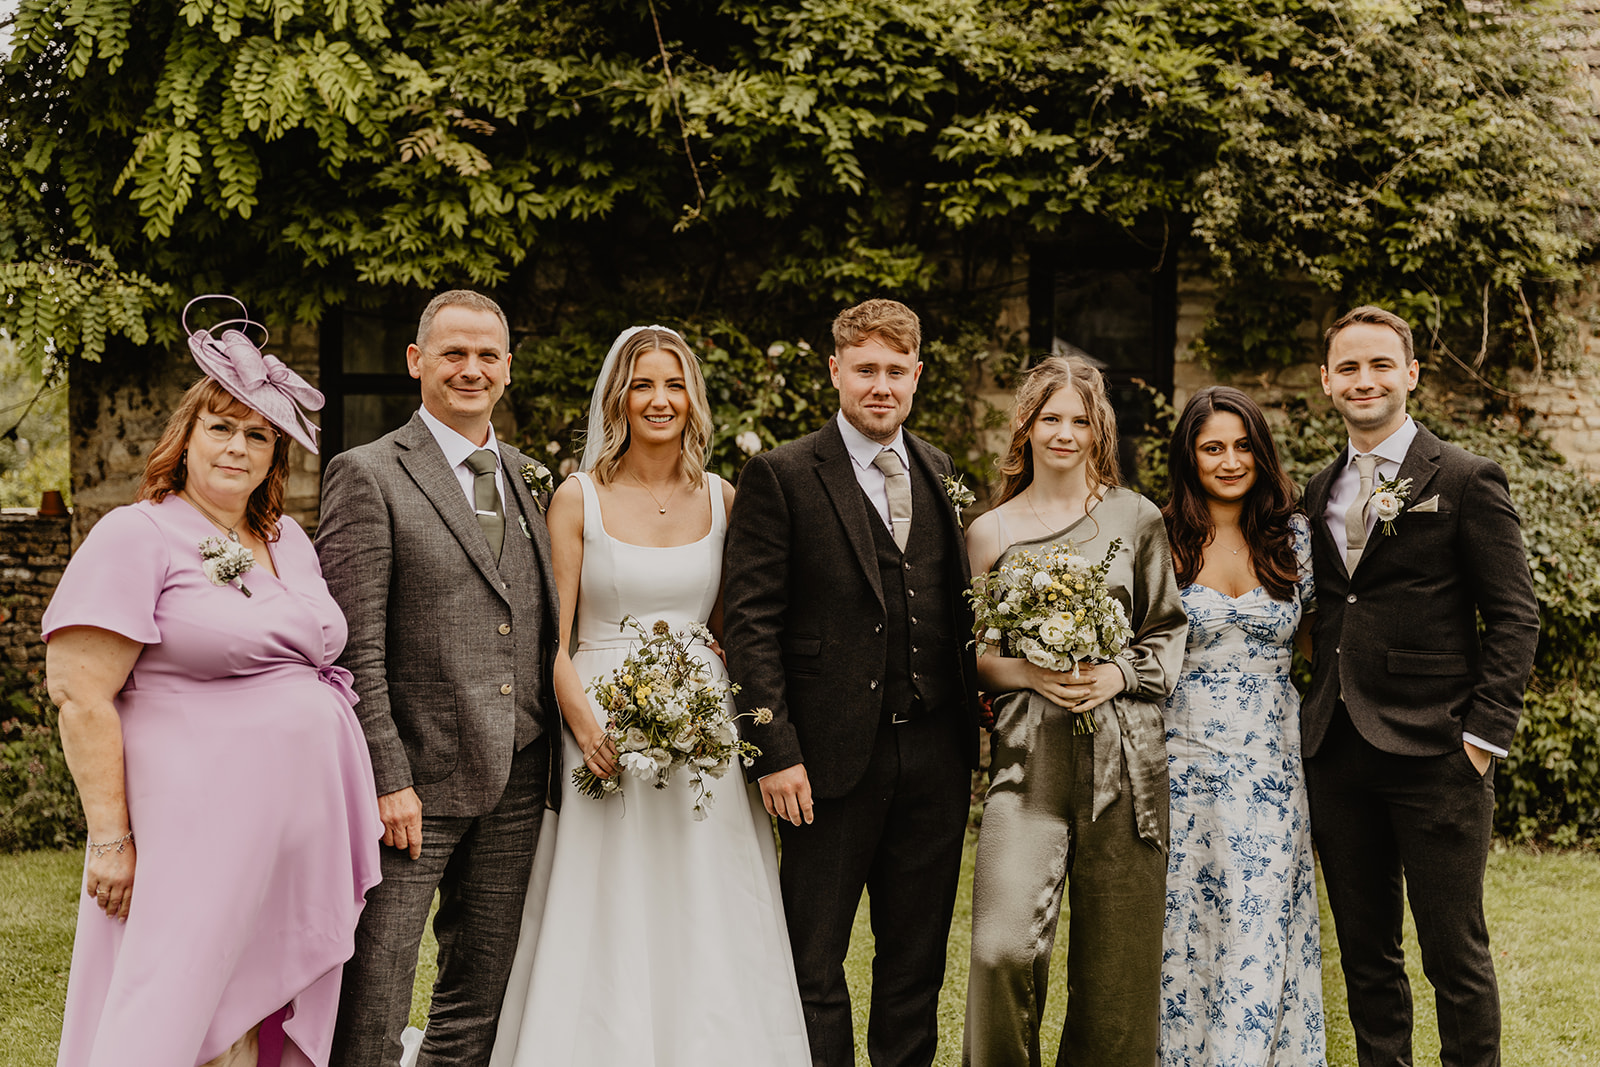 Bridal party at a Great Tythe Barn Wedding, Cotswolds. By Olive Joy Photography.